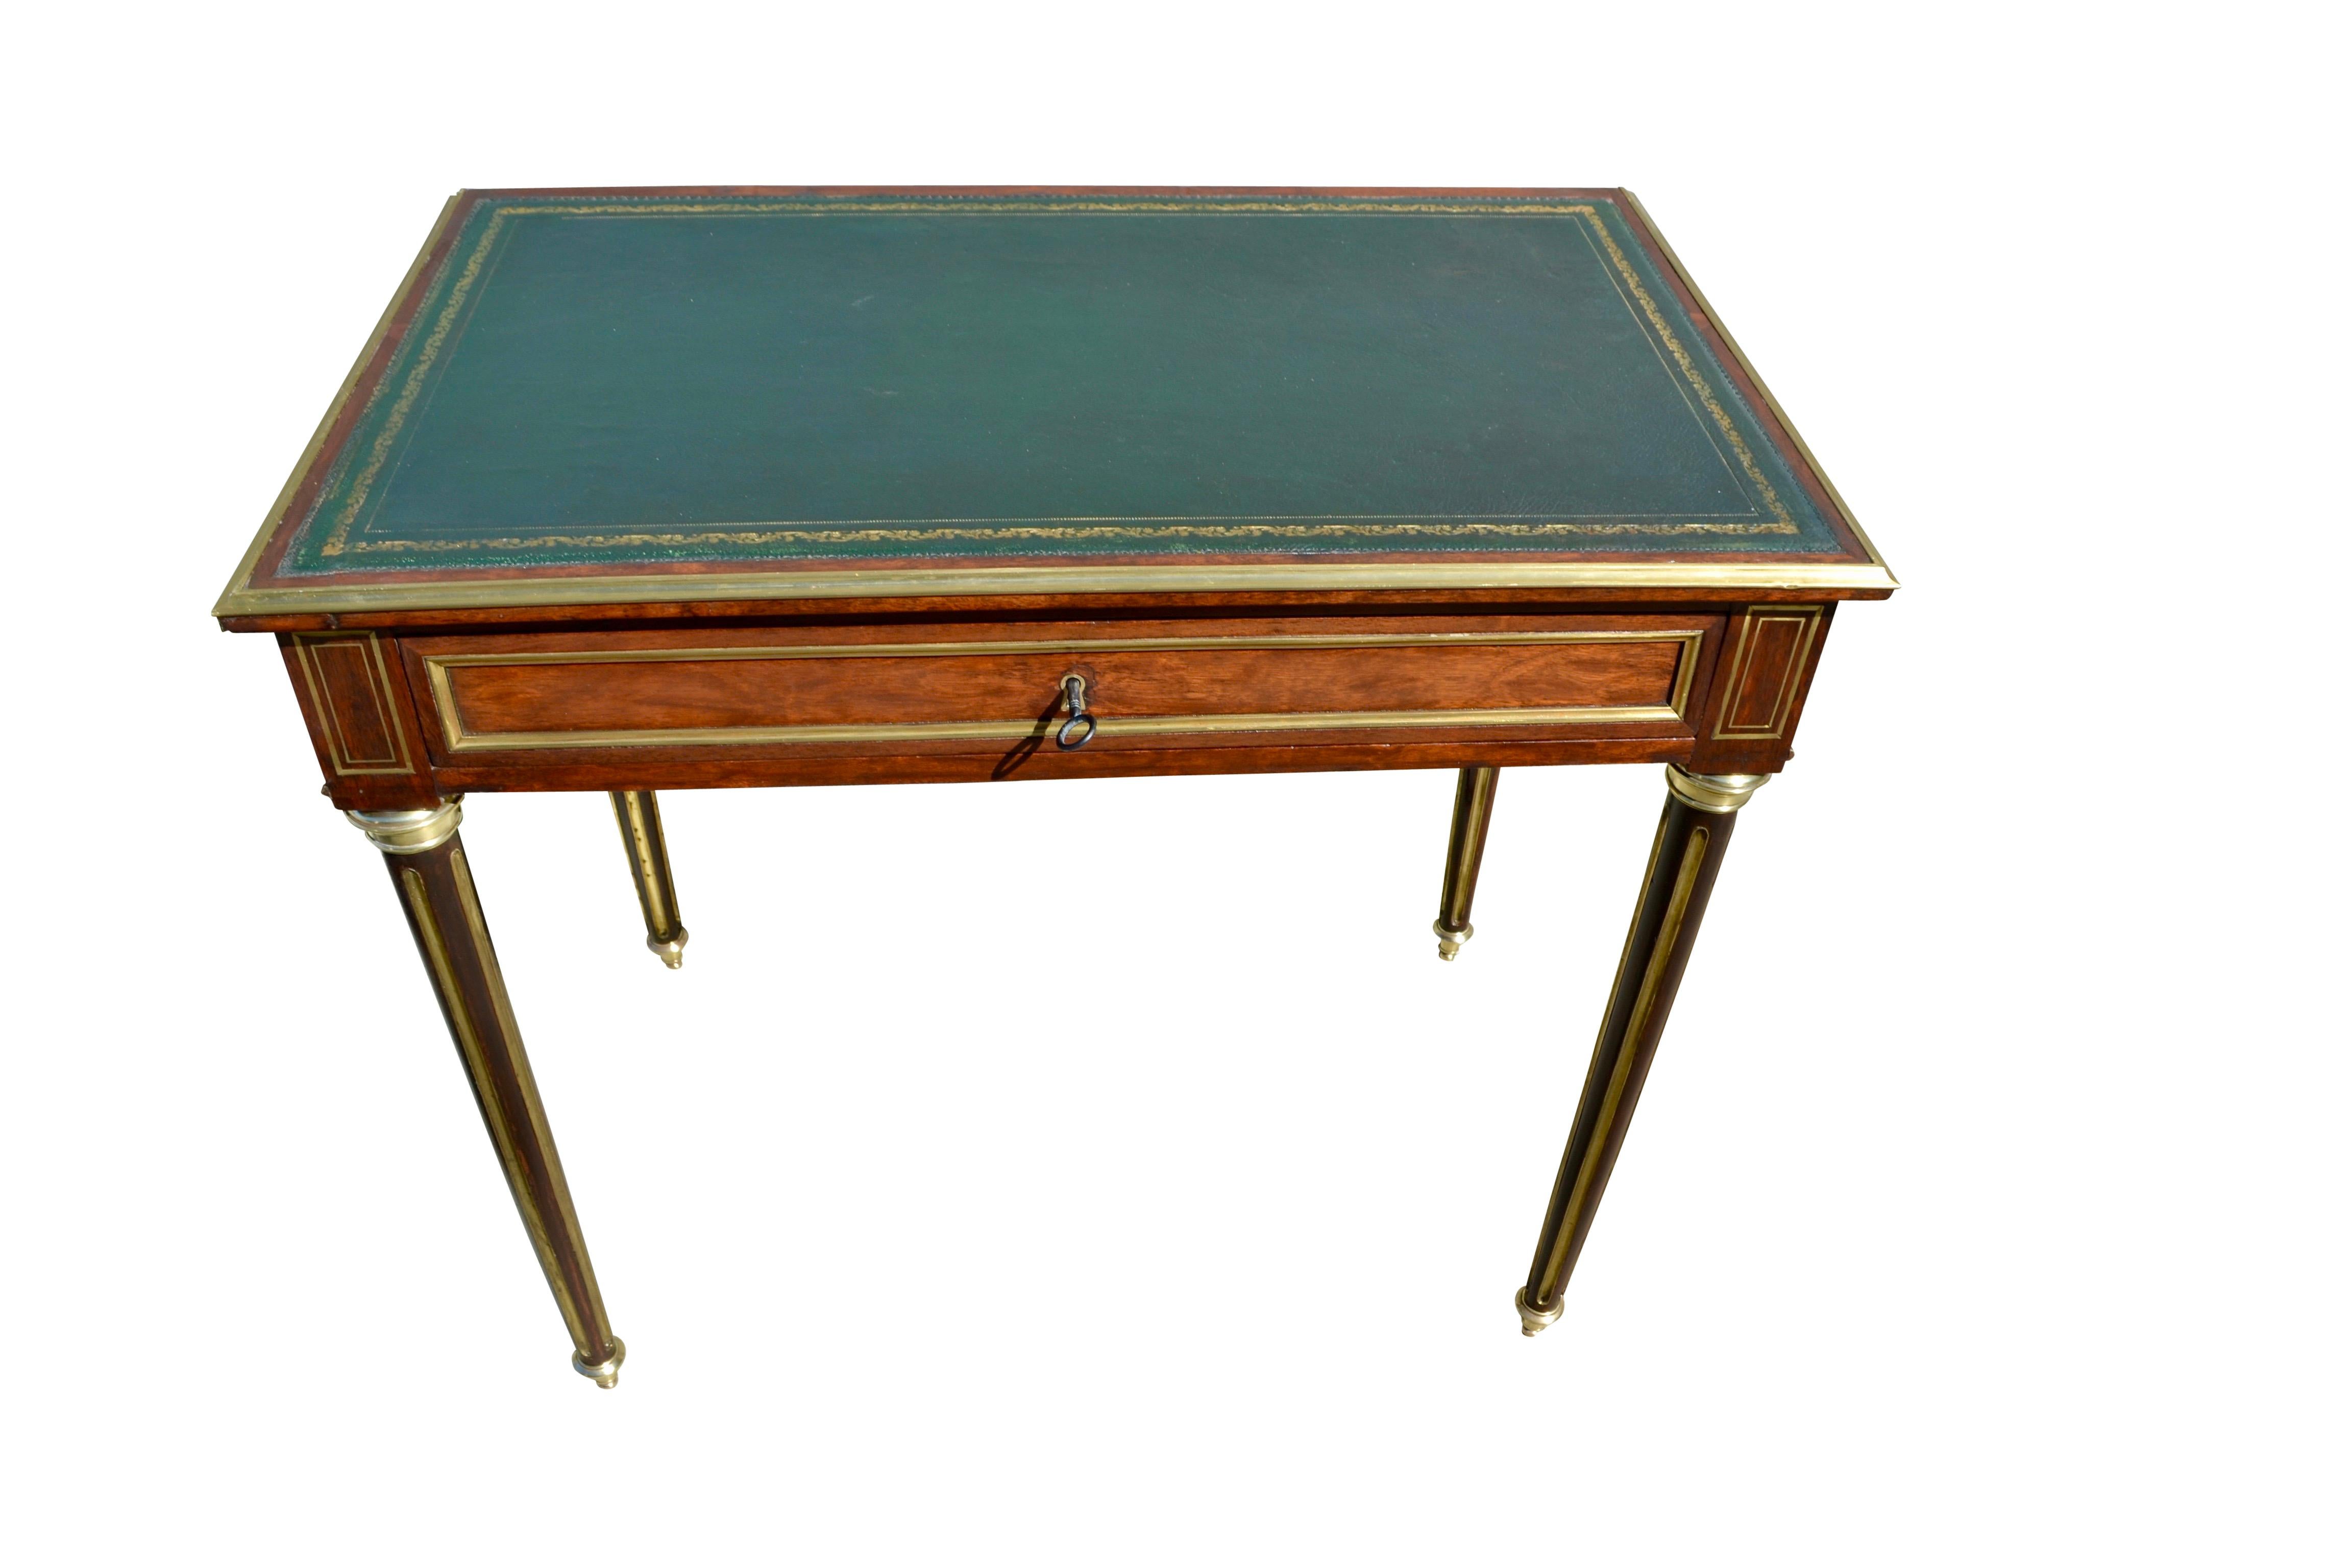 A late 19 century French Louis XVI style writing table and console. The mahogany table has a green tooled leather top bordered in gilt bronze trim above a single mahogany lined drawer with its original lock and key. There is further decorative brass